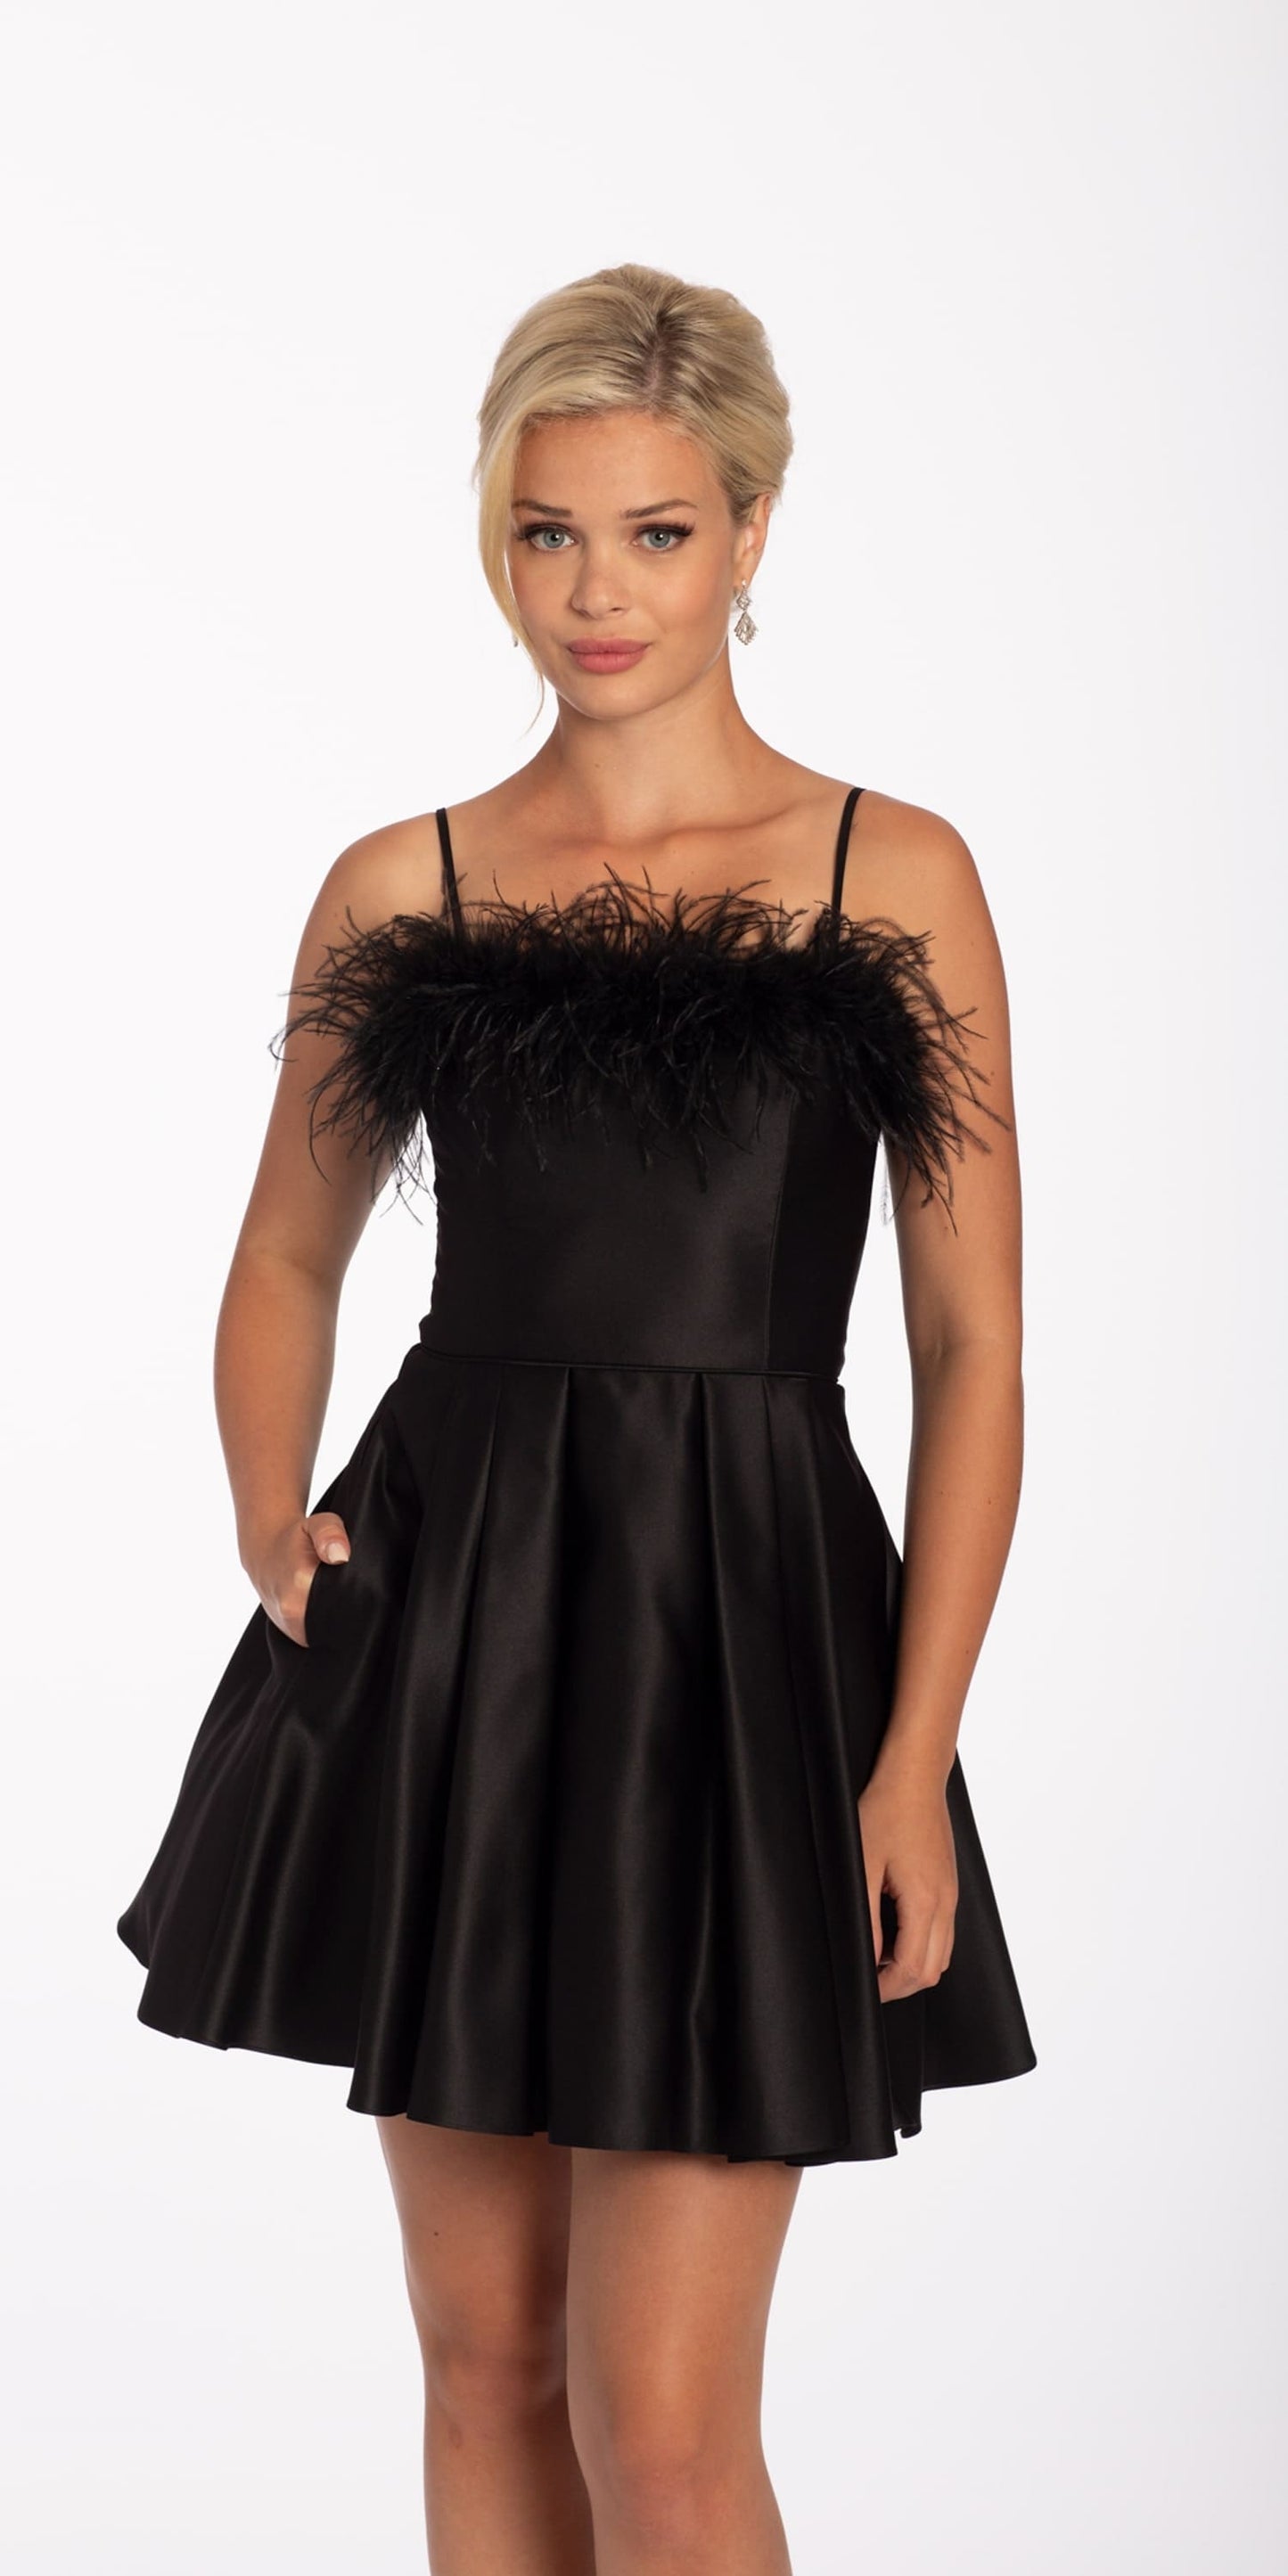 Camille La Vie Pleated Satin Fit and Flare Dress with Feather Detail missy / 2 / black